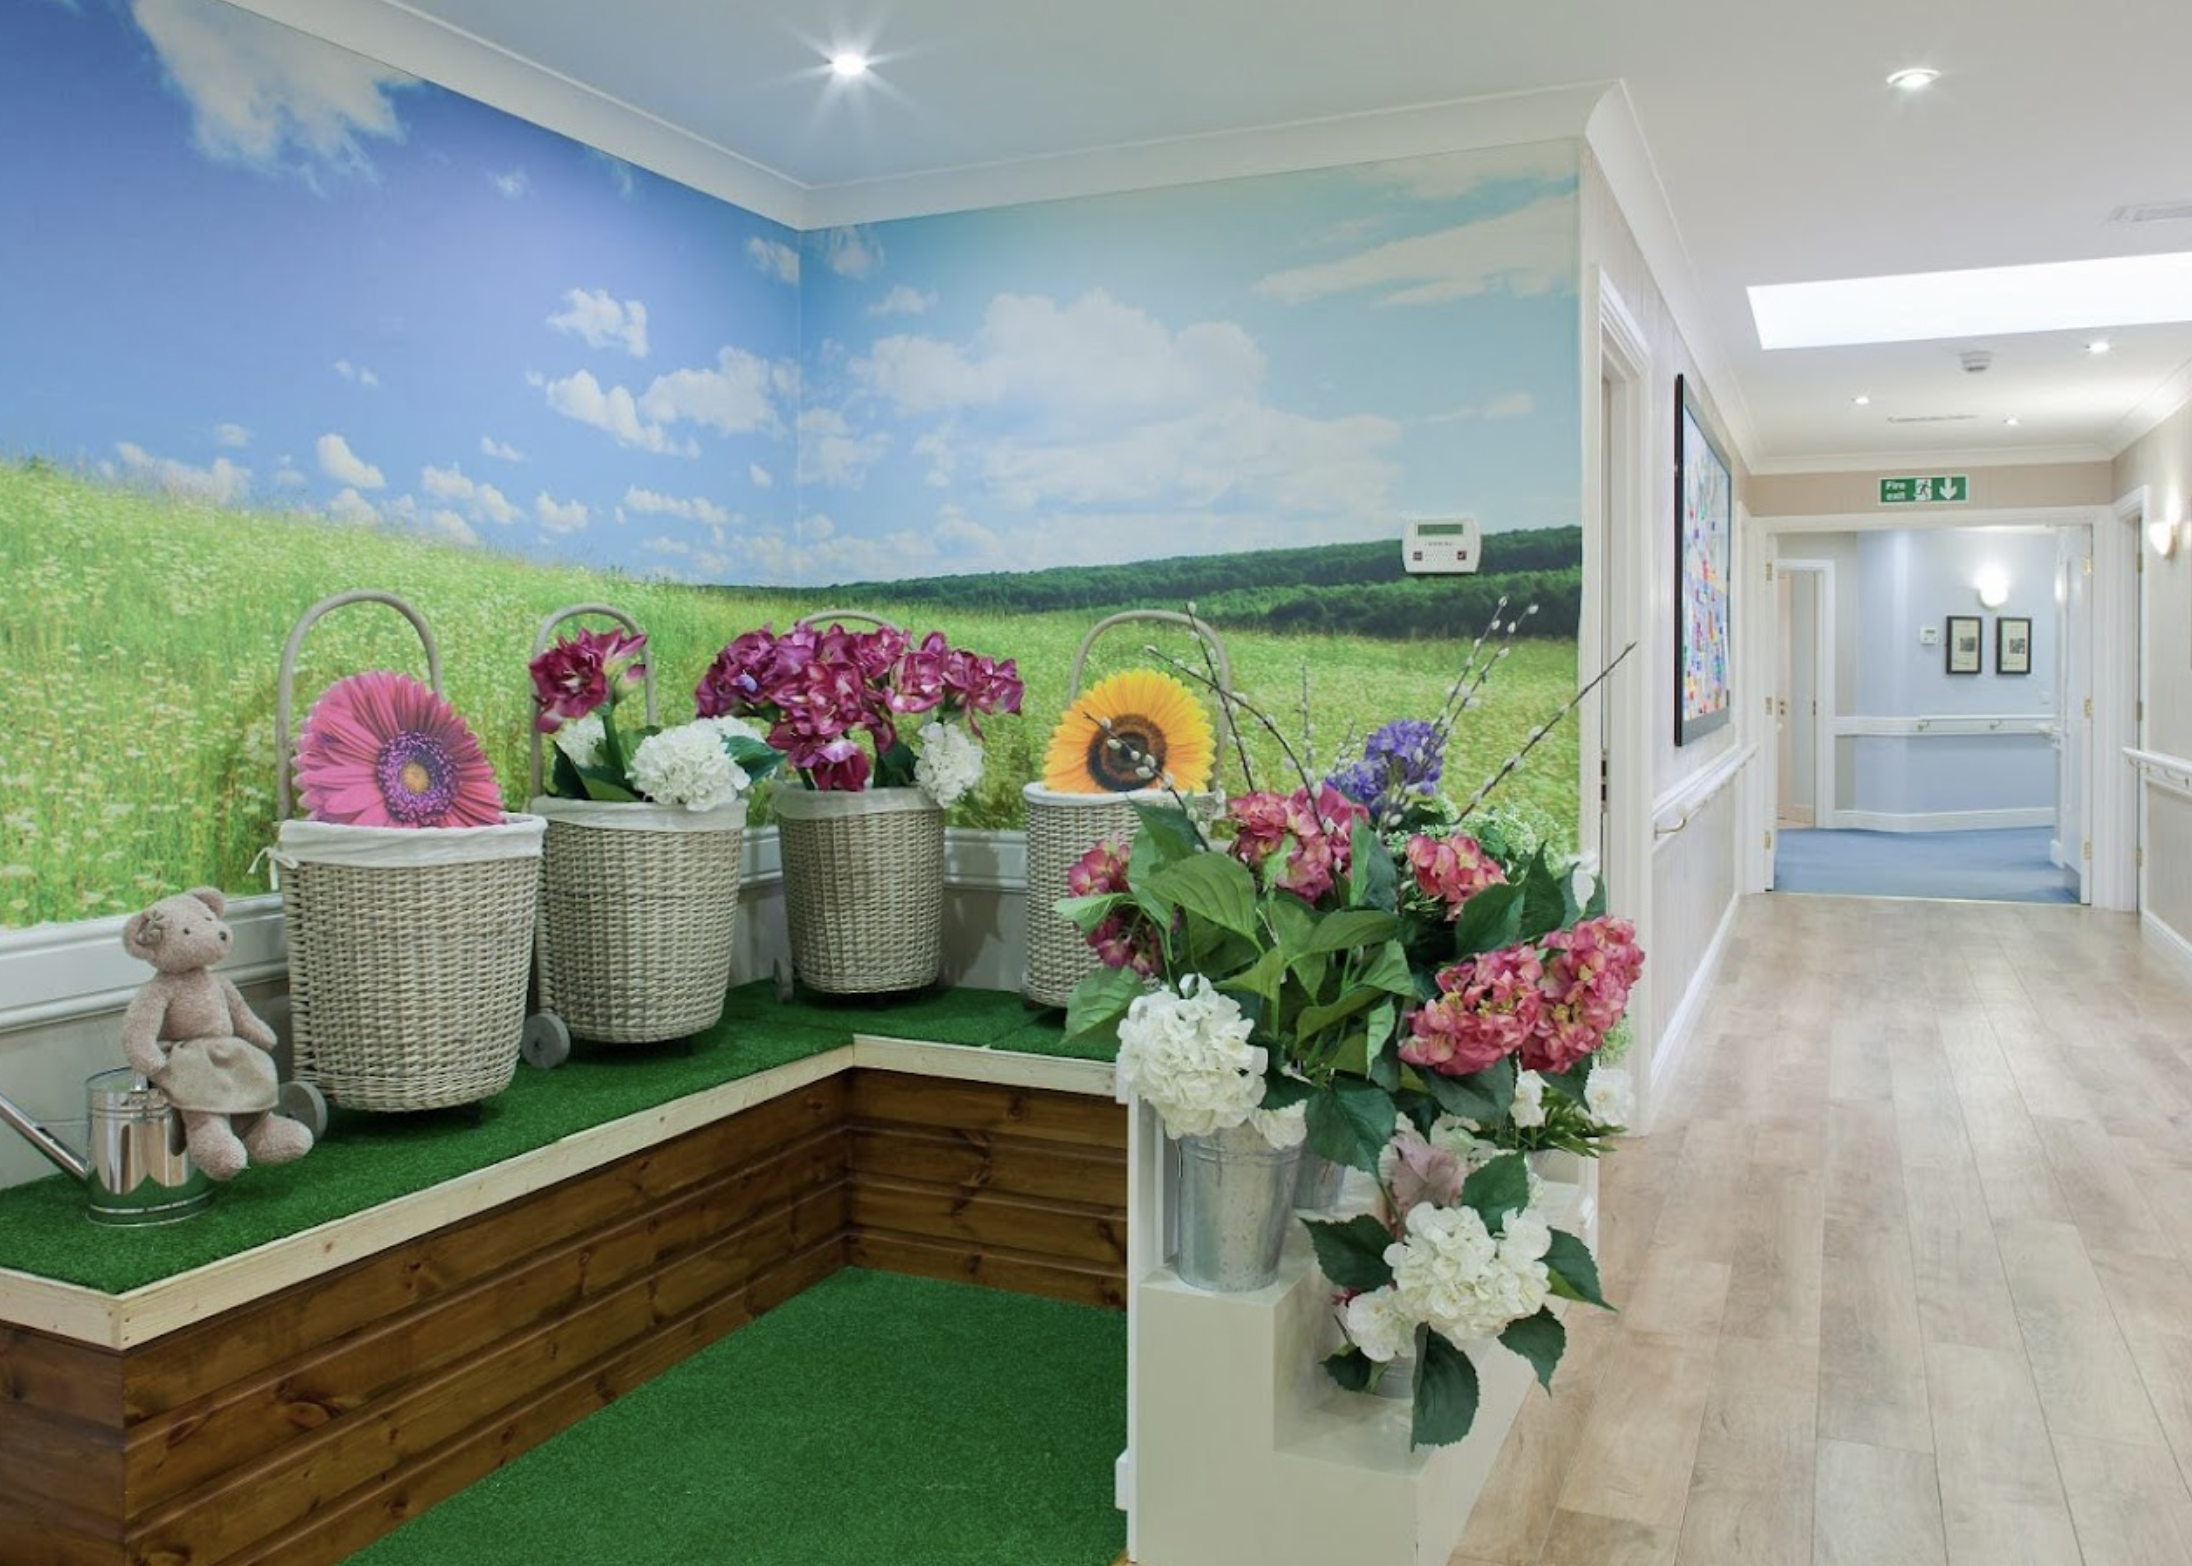 Hallway of Berkeley House care home in Hull, East Yorkshire